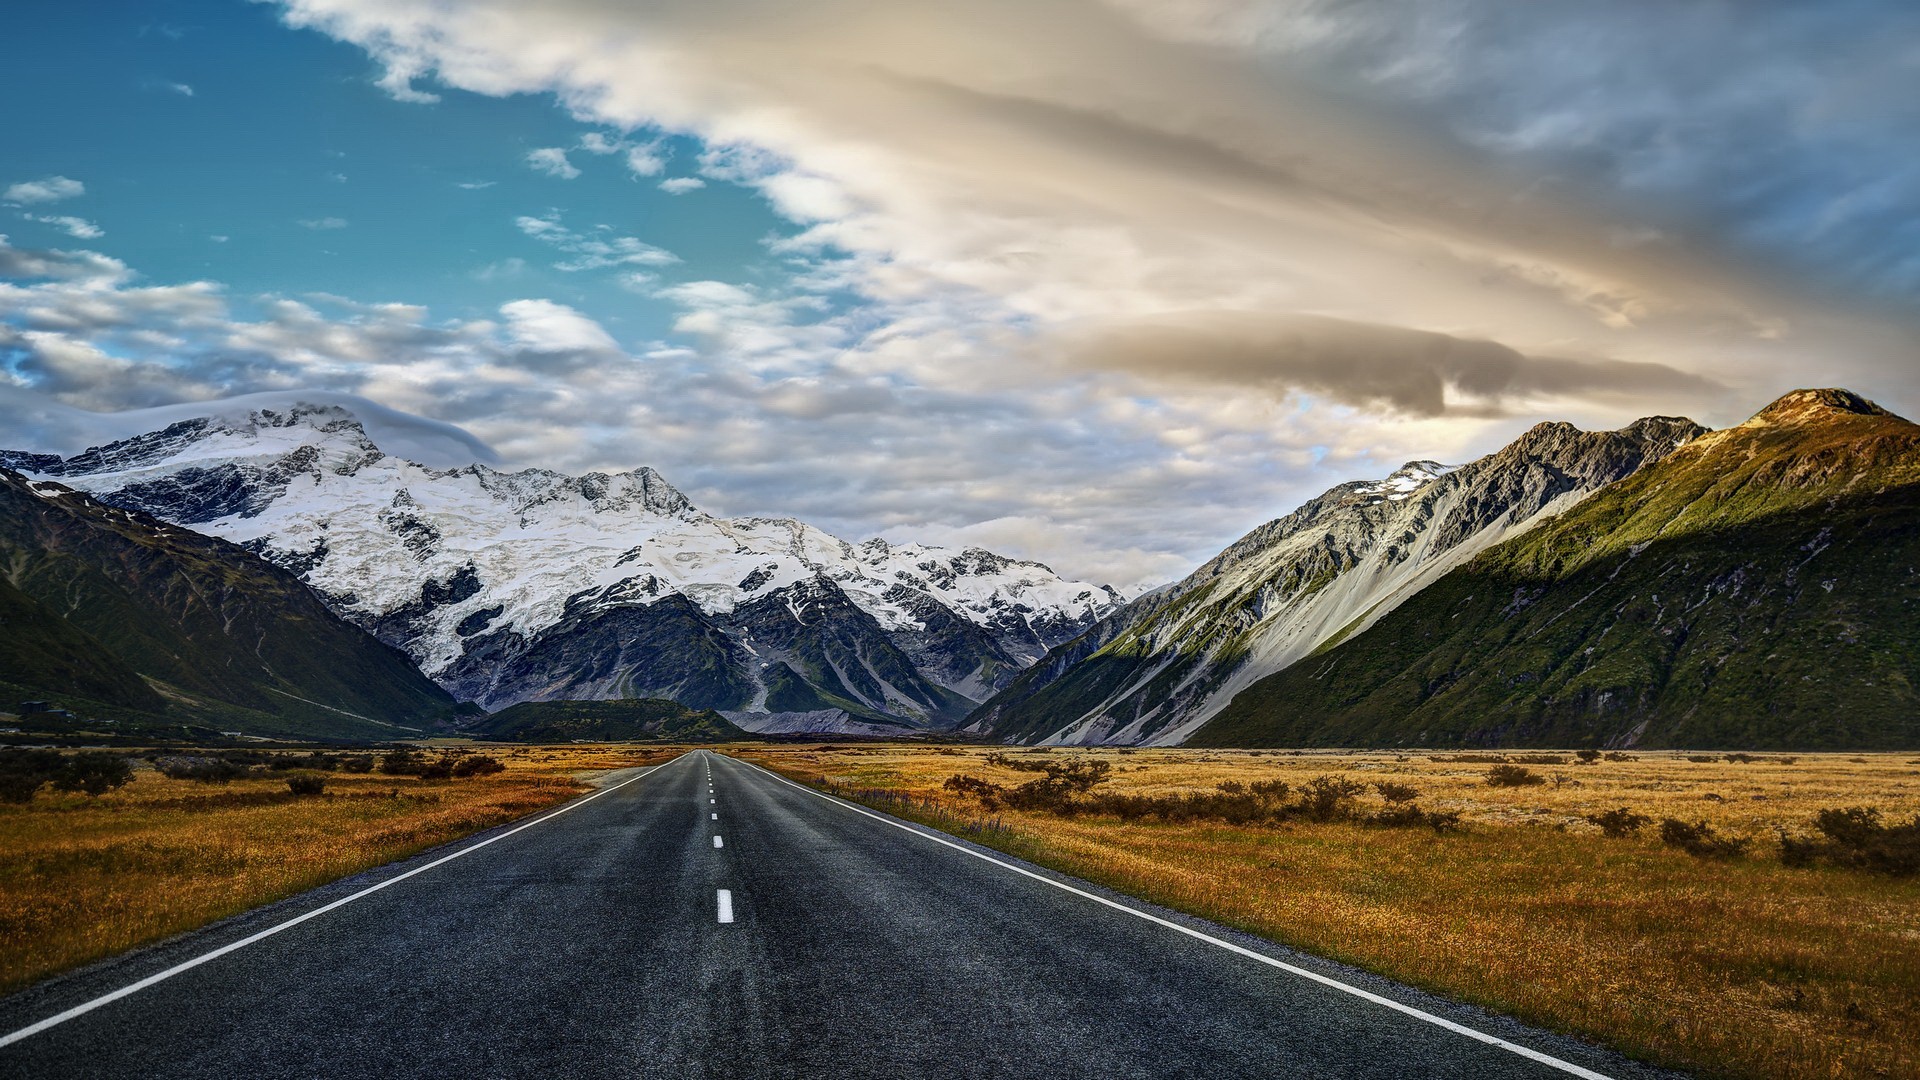 General 1920x1080 landscape road mountains snowy mountain valley Mount Cook New Zealand long road snowy peak